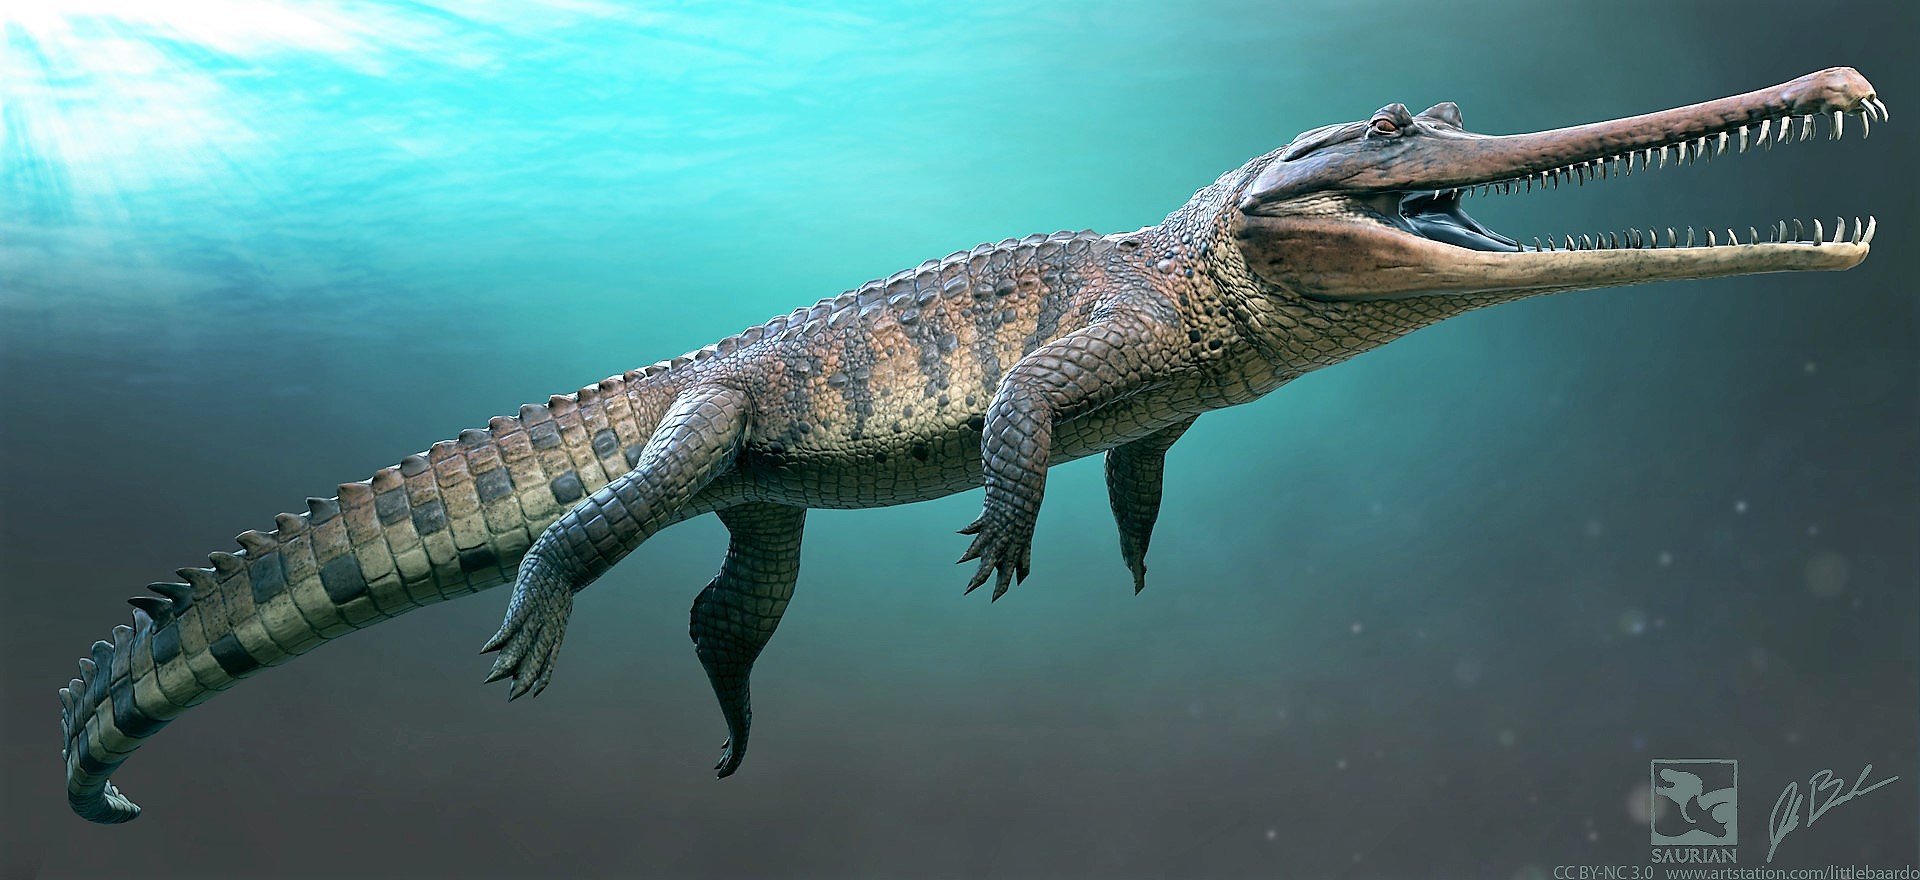 When is a croc not a croc? When it’s a thoracosaur